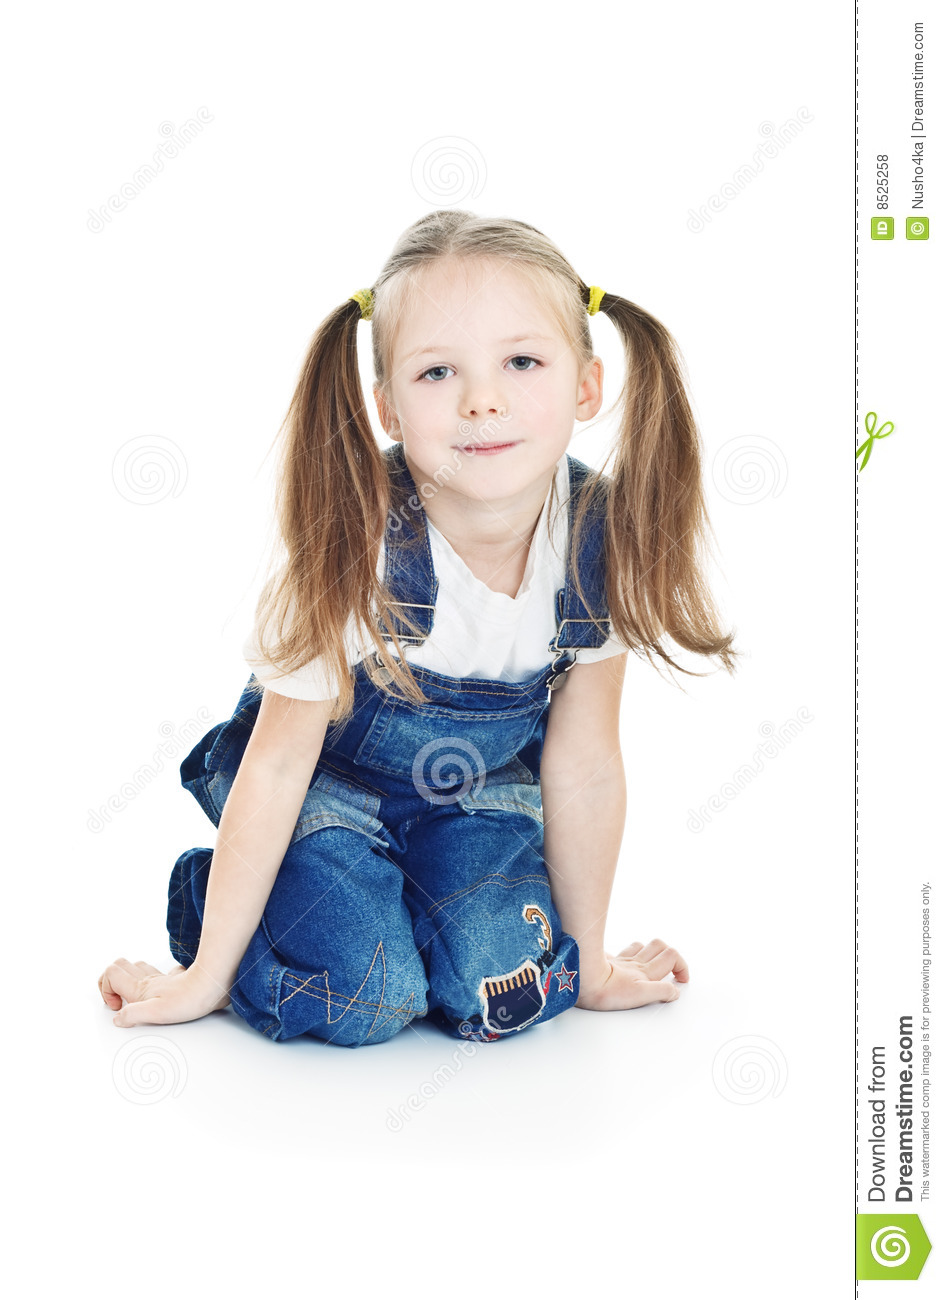 Little Smiling Girl In Blue Jeans Royalty Free Stock Photos   Image